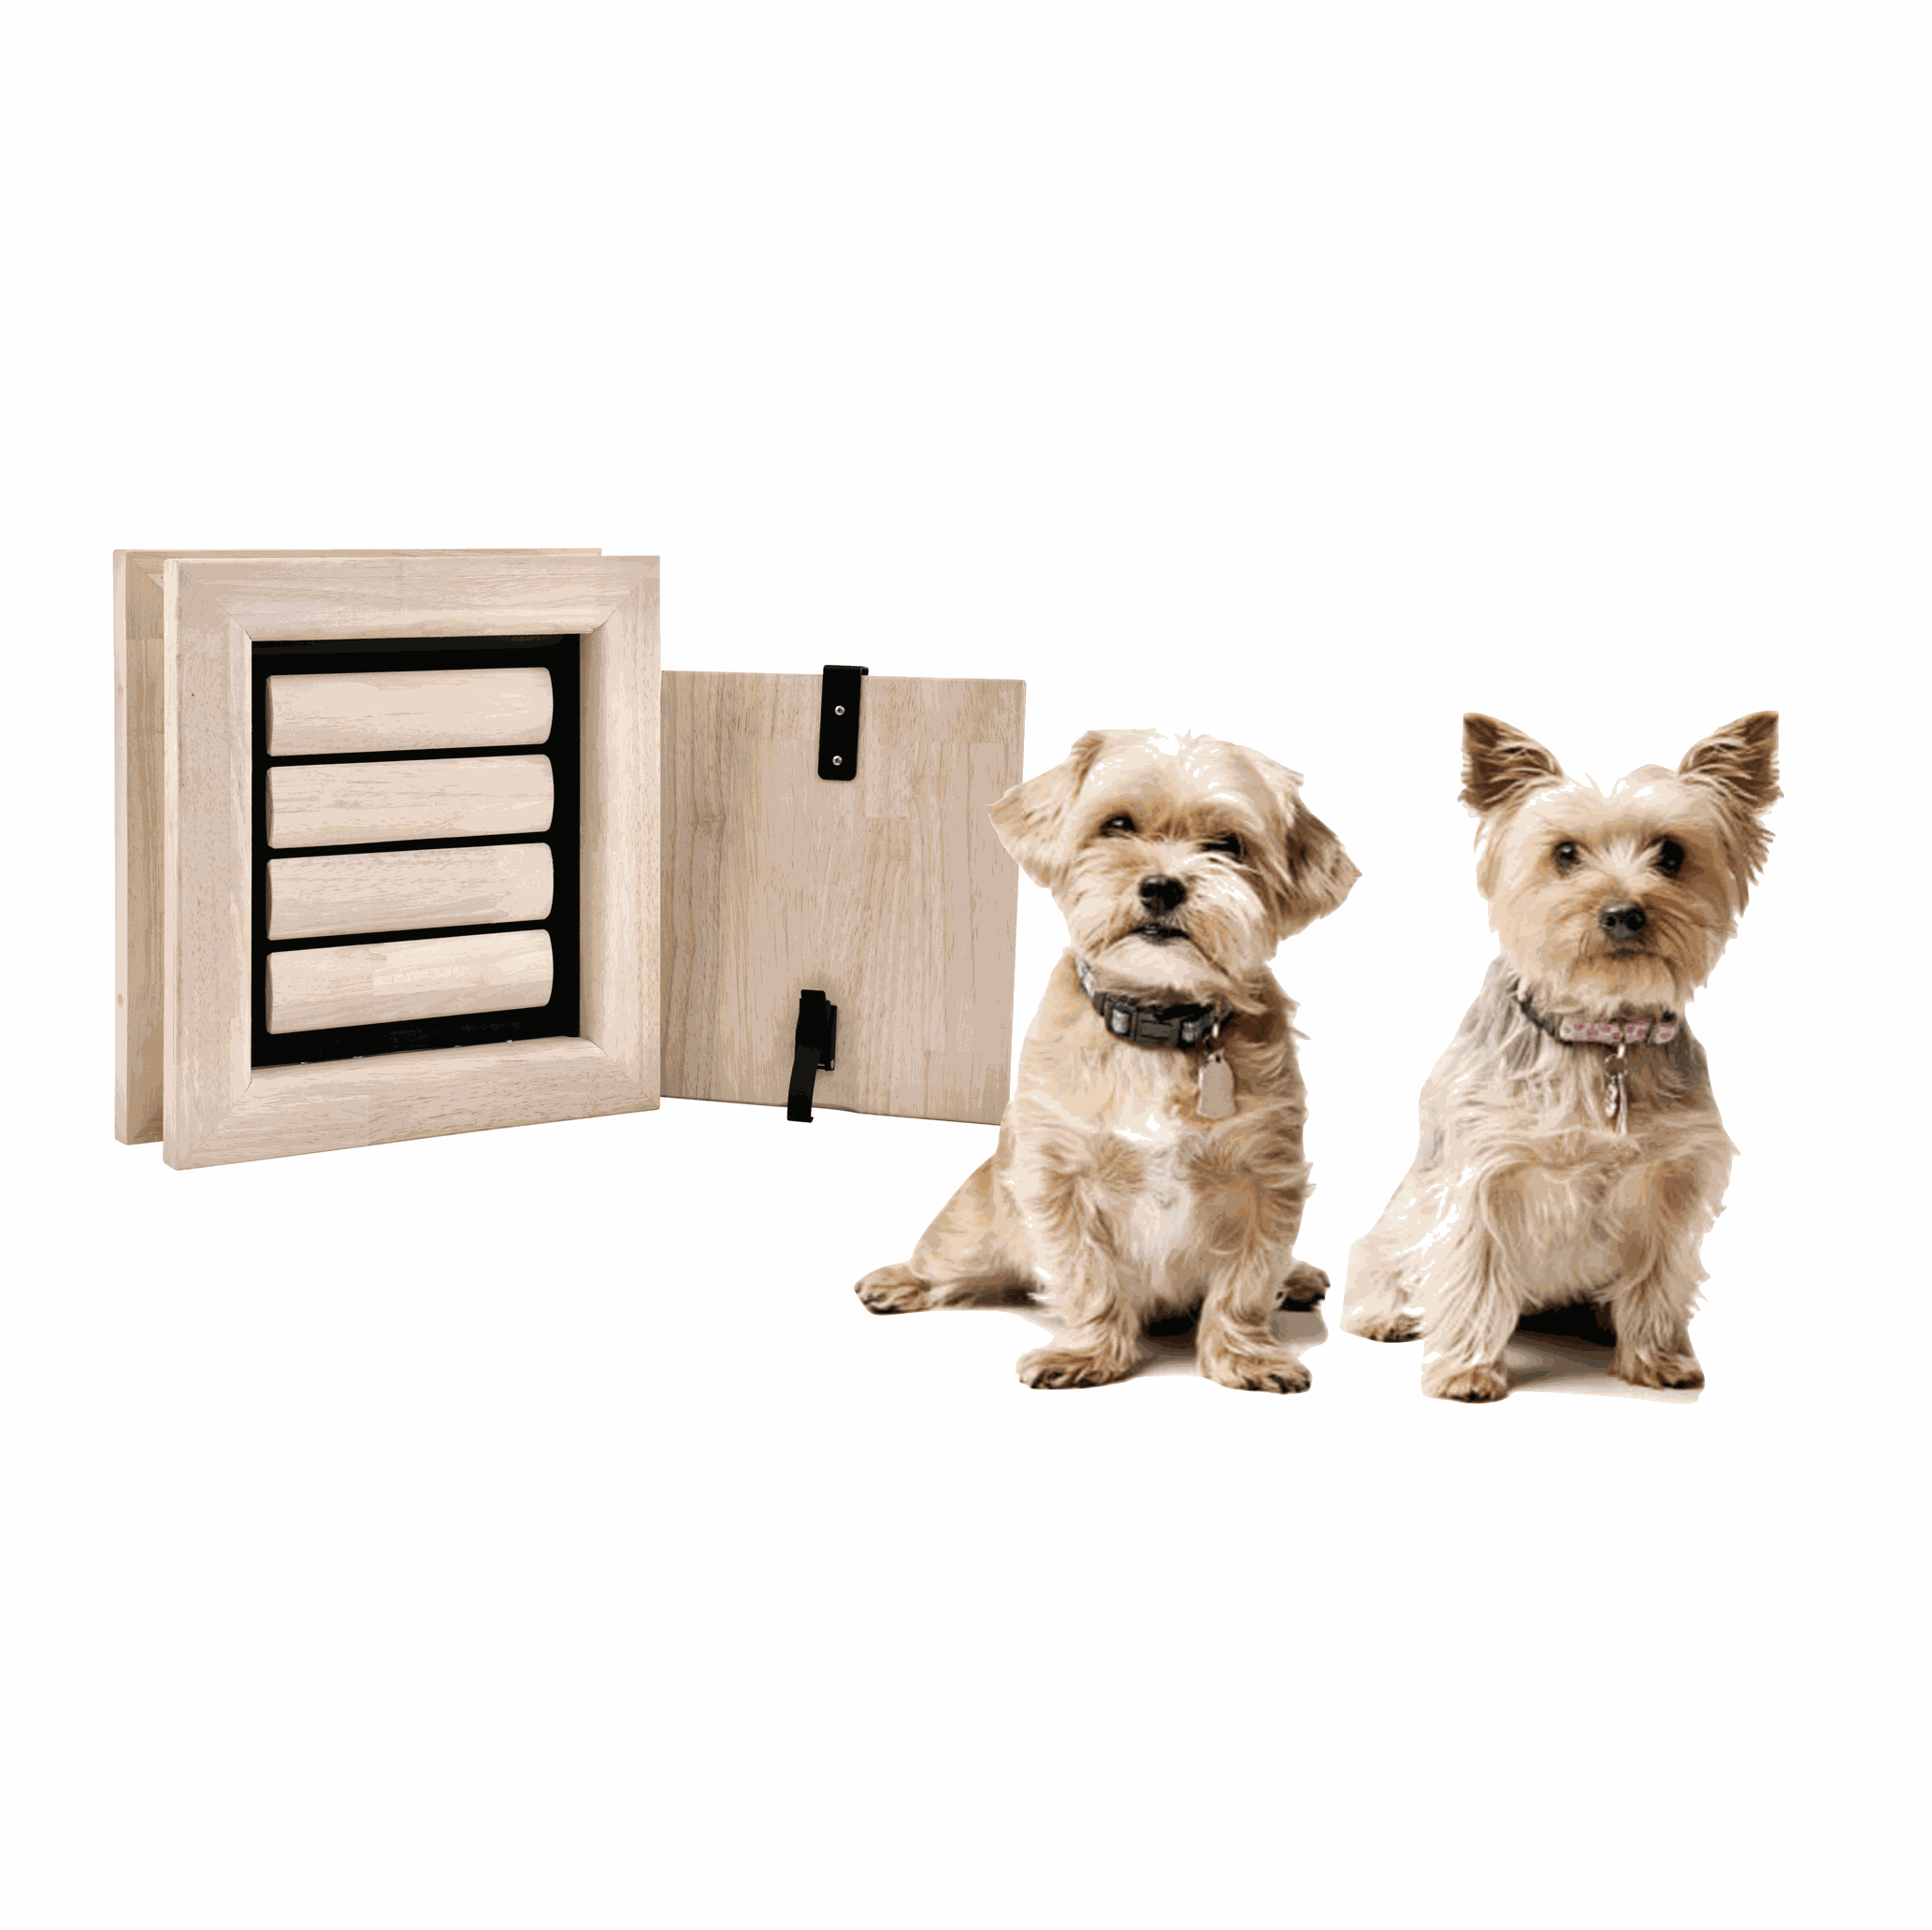 Dog Flap | Dog Door | Nipper (Small) dog flap for small dogs | fits in doors and walls | Yorkshire Terrier, Shih Tzu, French Bulldog, King Charles Spaniel, Maltese, Pug, Skipper, Brison Frisé, Chihuahua | © Tomsgates